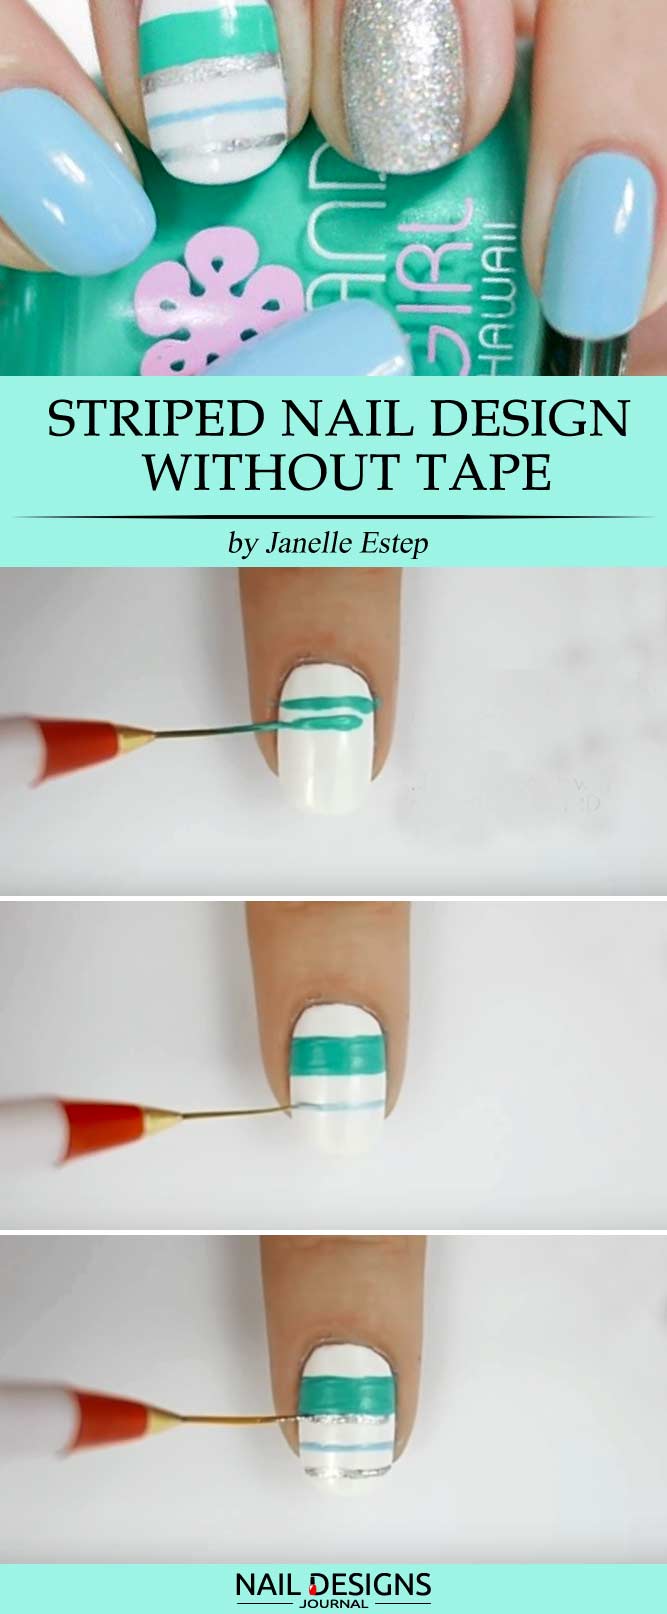 Striped nail design without the tape